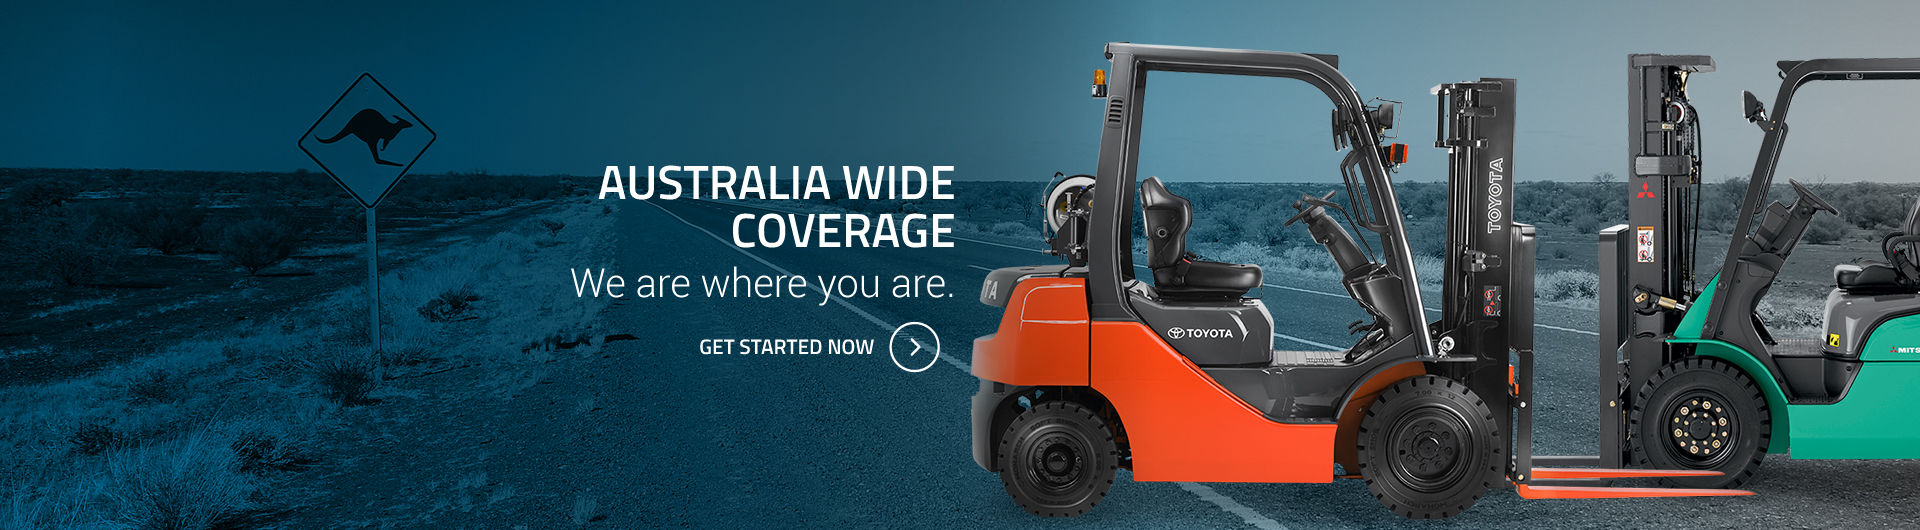 Formidable Forklifts - Sell used Forklifts Australia wide